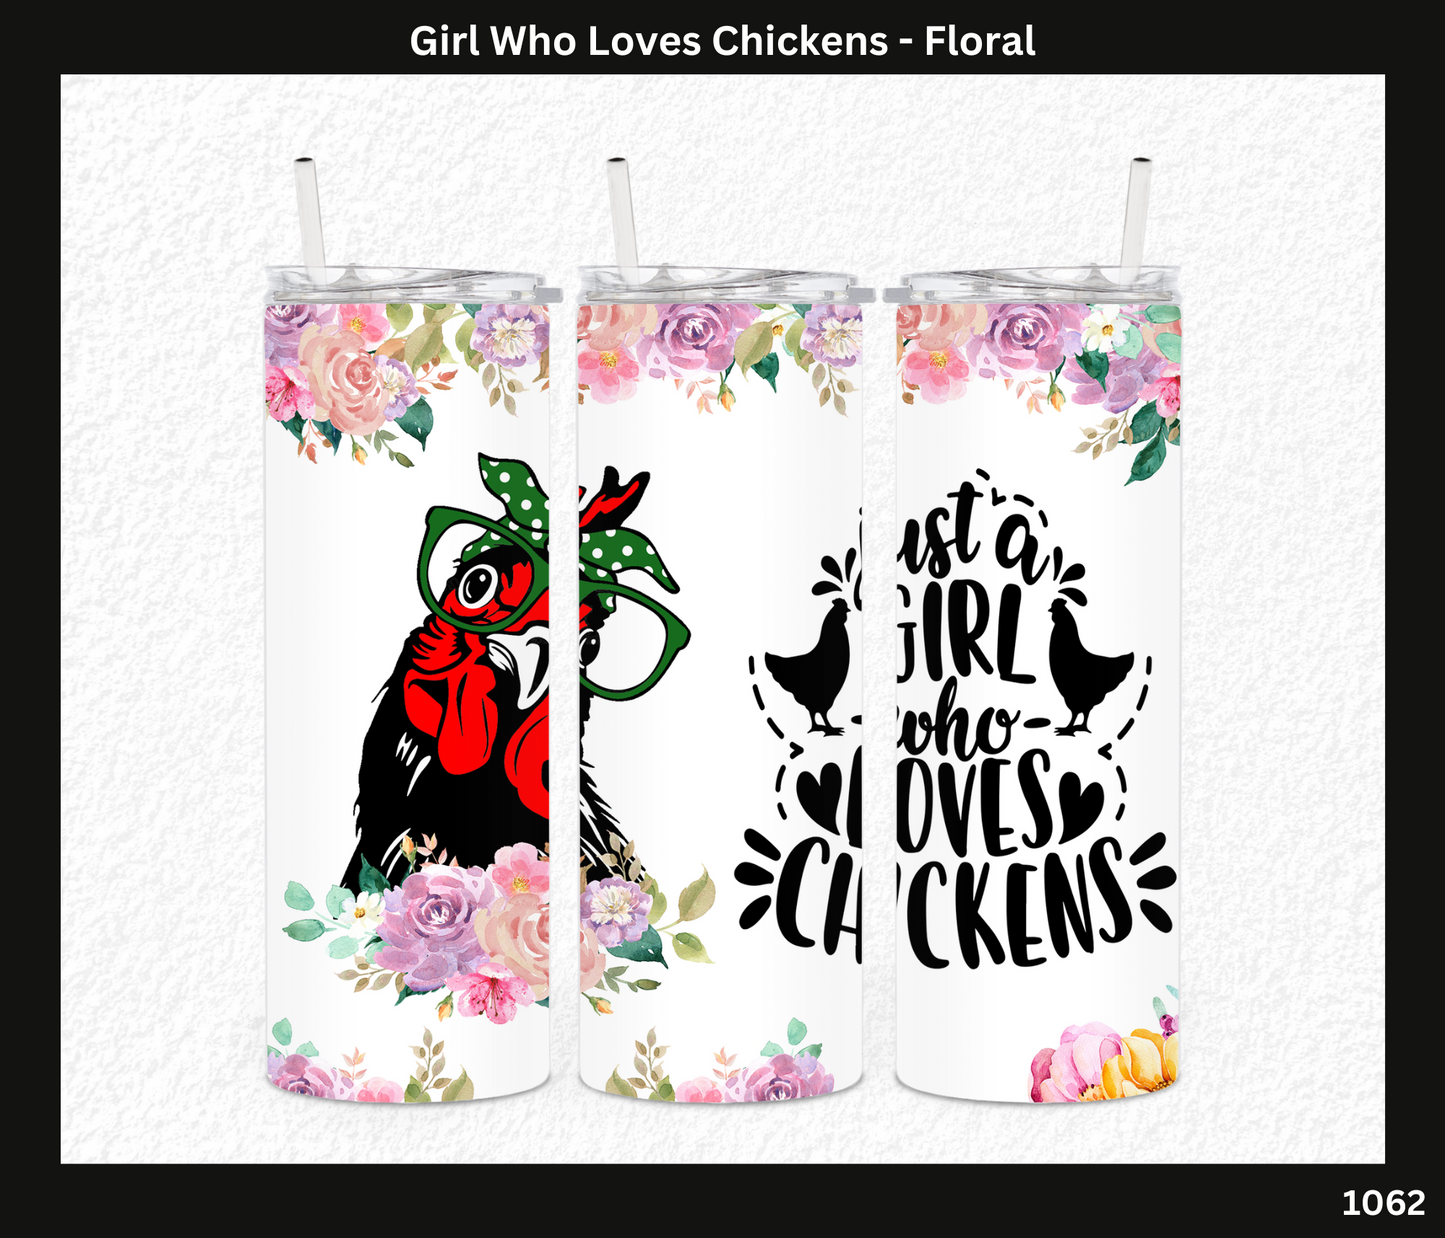 Girl Who Loves Chickens